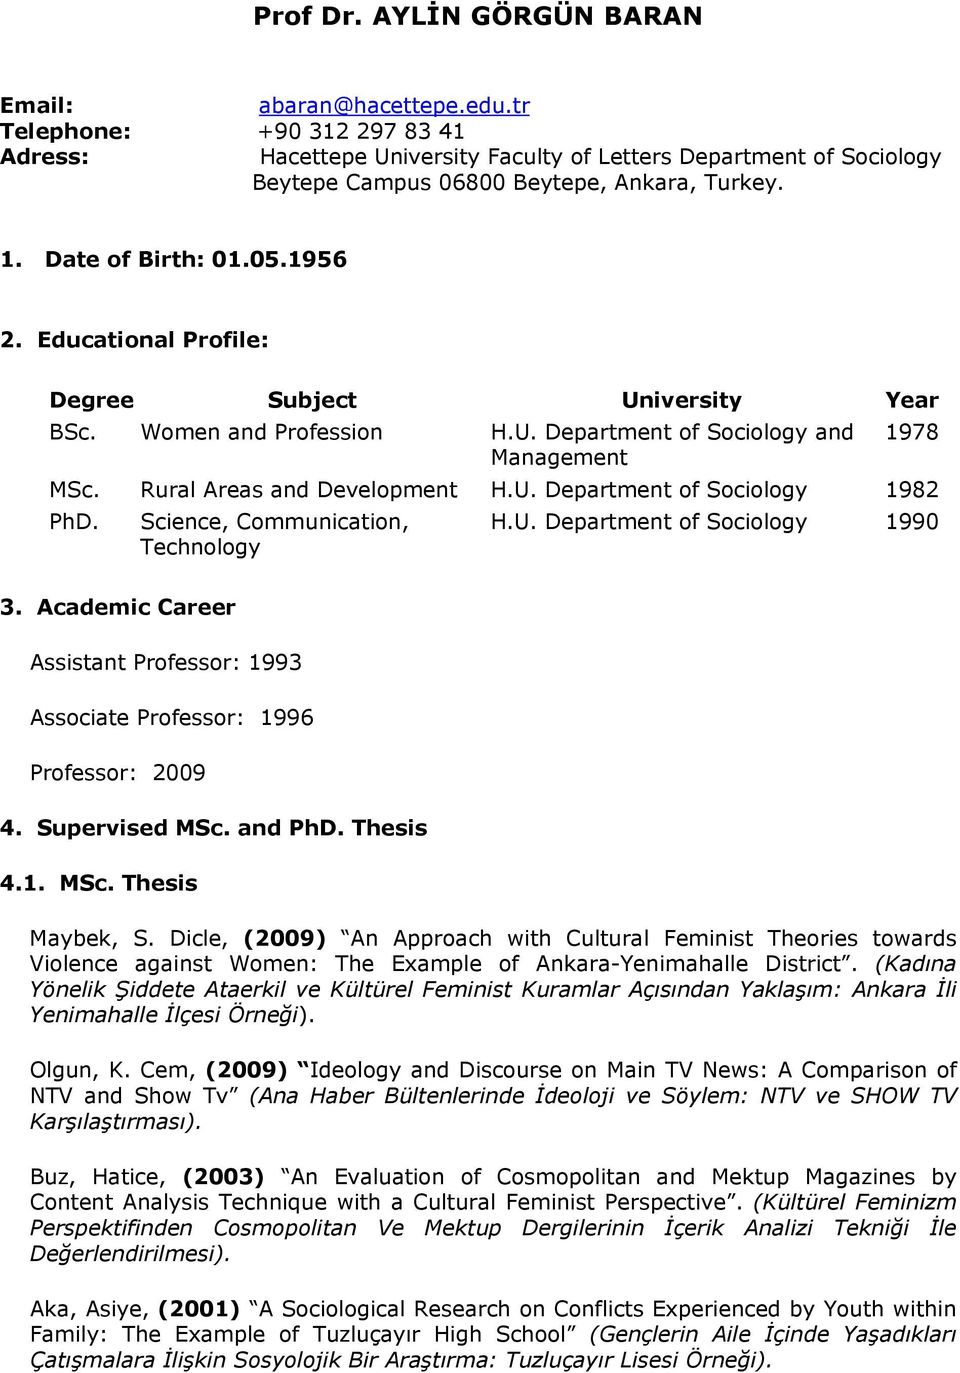 Educational Profile: Degree Subject University Year BSc. Women and Profession H.U. Department of Sociology and Management 1978 MSc. Rural Areas and Development H.U. Department of Sociology 1982 PhD.